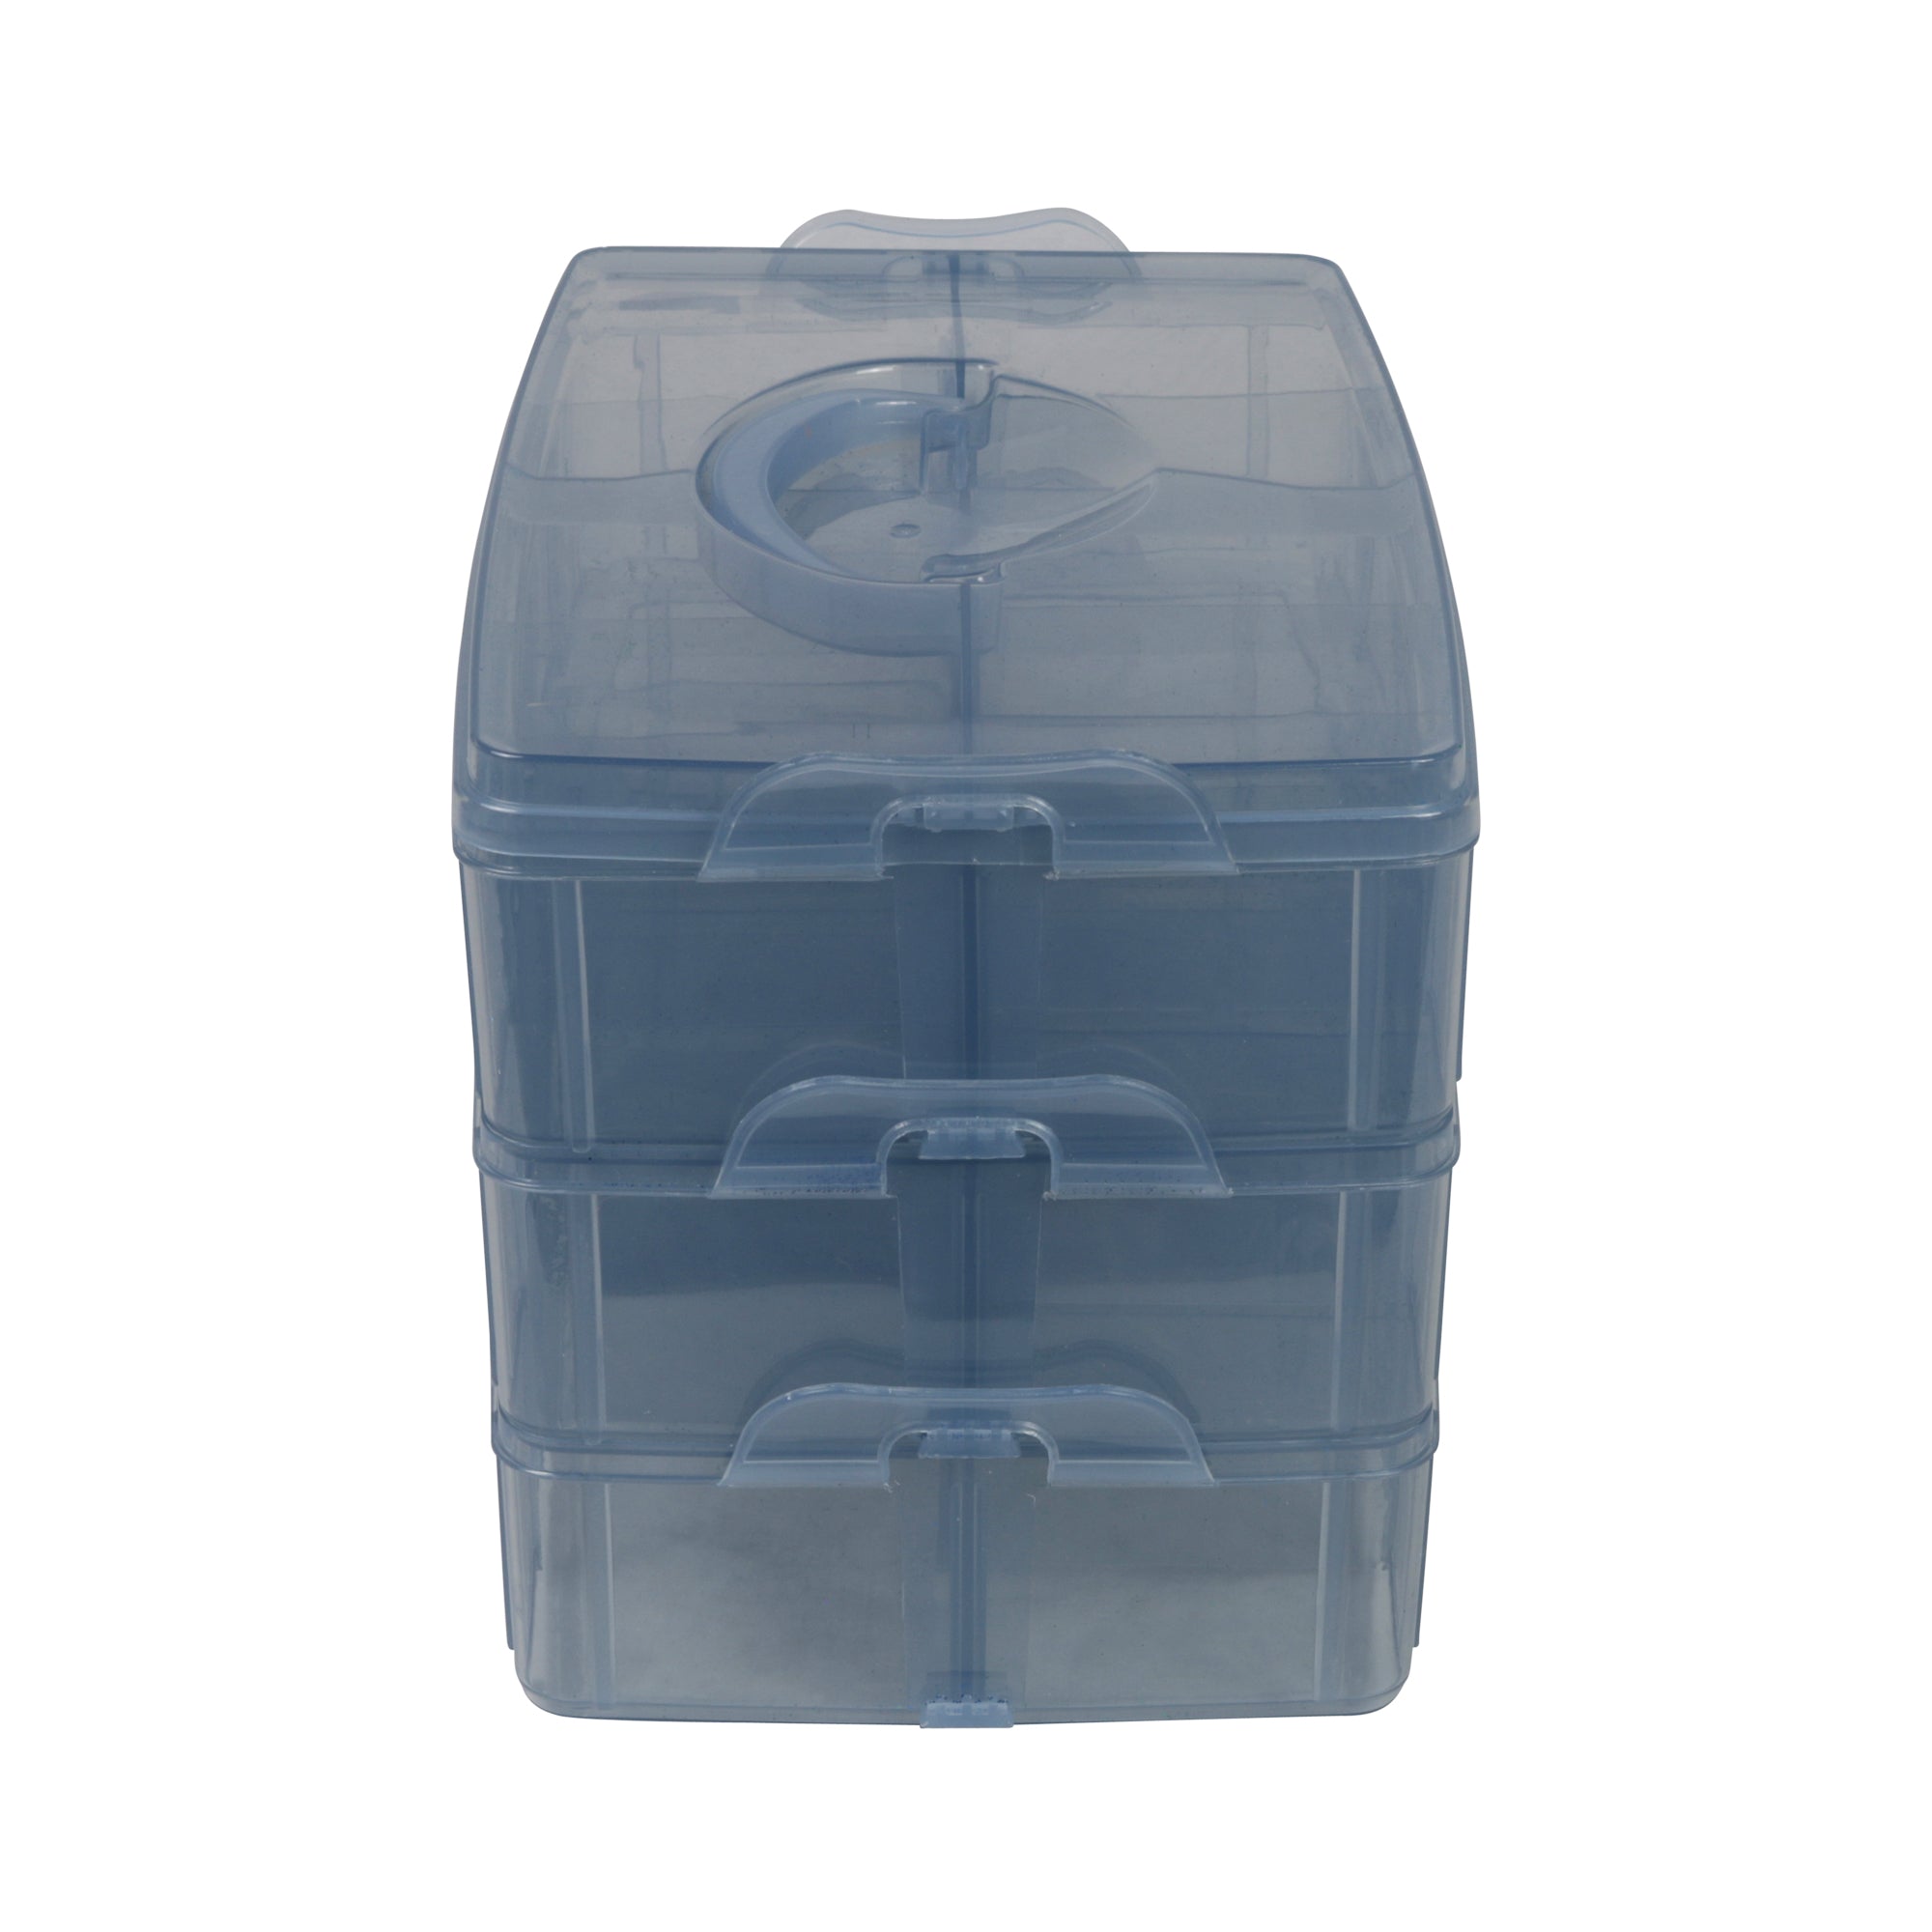 Belle Vous 3 Tier Transparent Plastic Stackable Storage Box - Adjustable Compartment Slots - Max 30 Compartments - Container for Storing & Organi